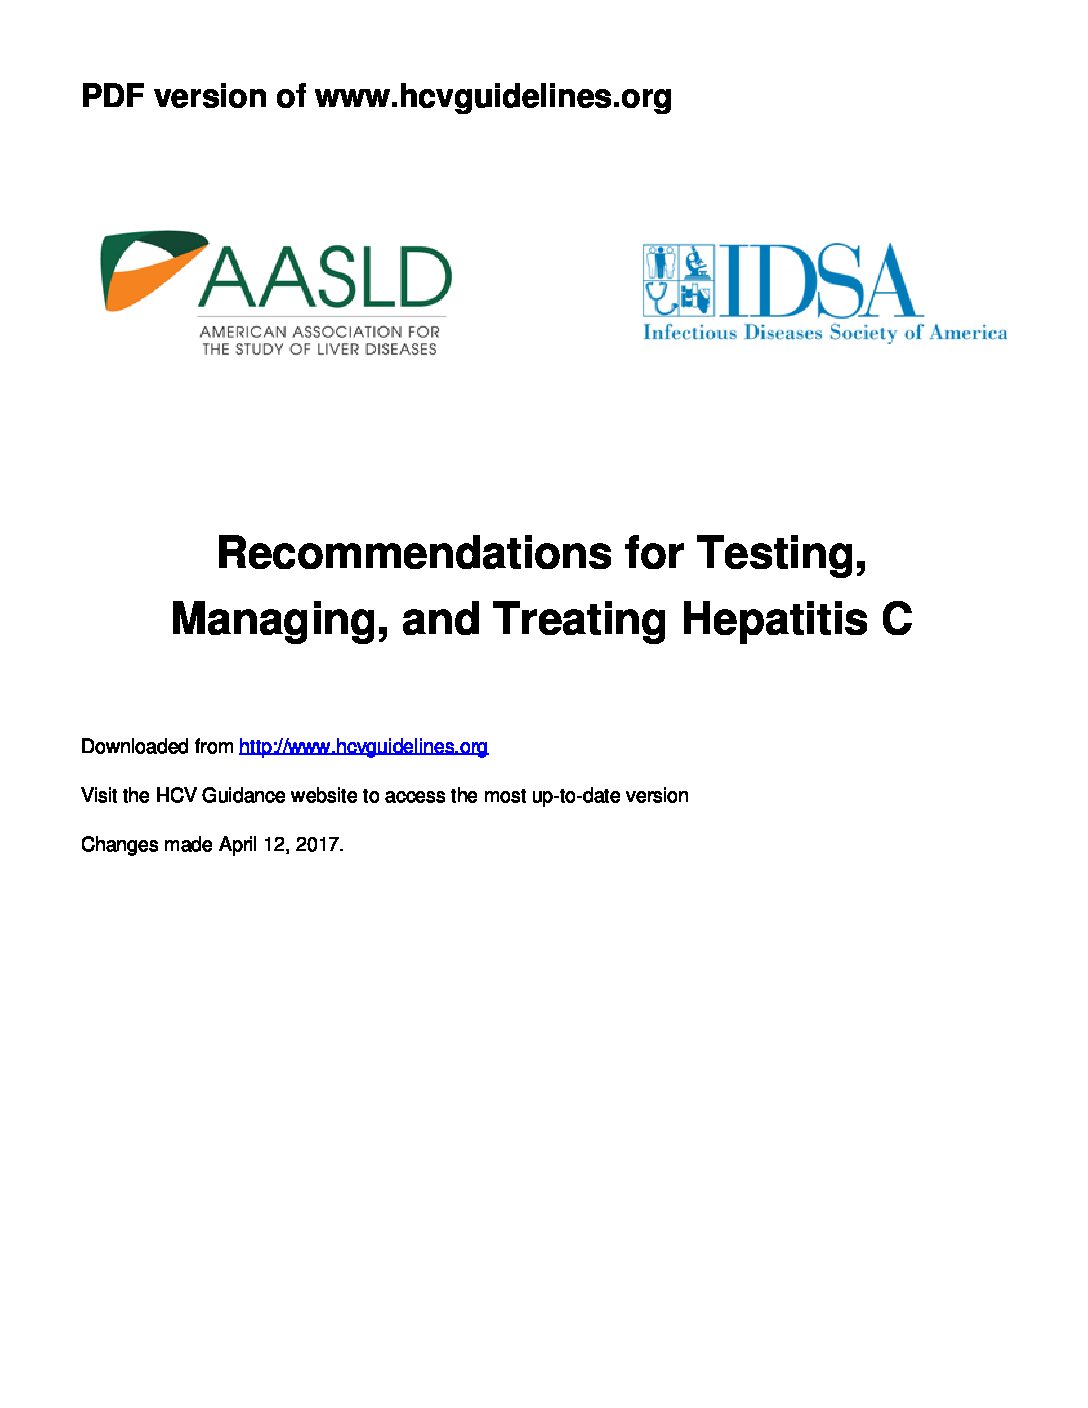 Recommendations for Testing, Managing, and Treating Hepatitis C – April 12, 2017